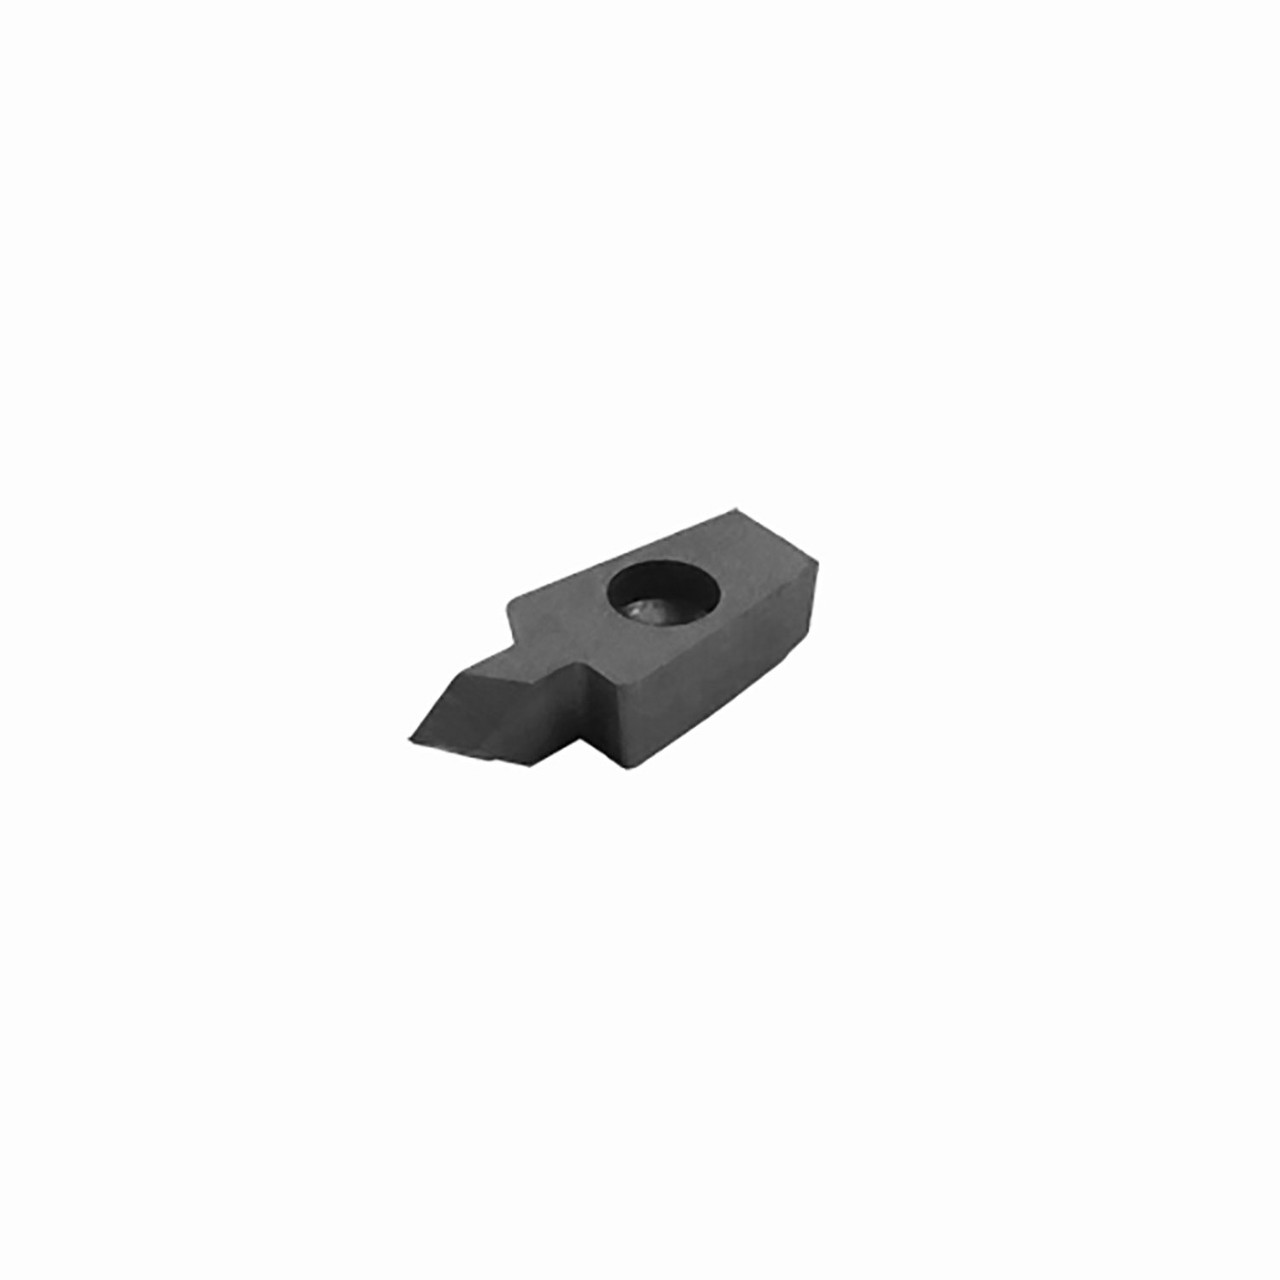 Oneway, Easy Core Carbide Cutter for Bowl Coring Knife